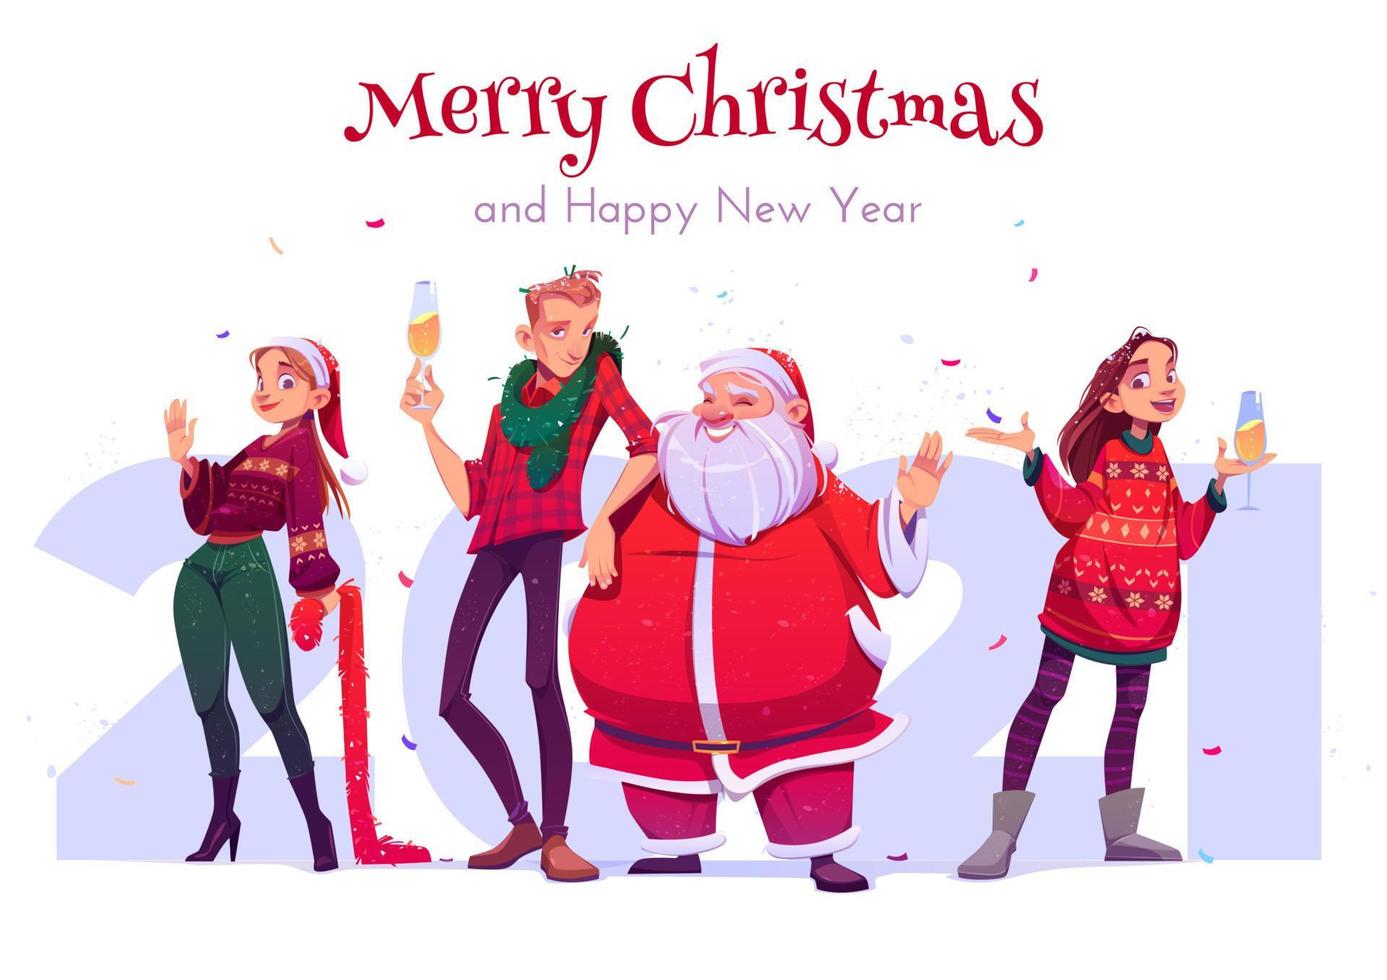 Merry Christmas and Happy New year celebration vector